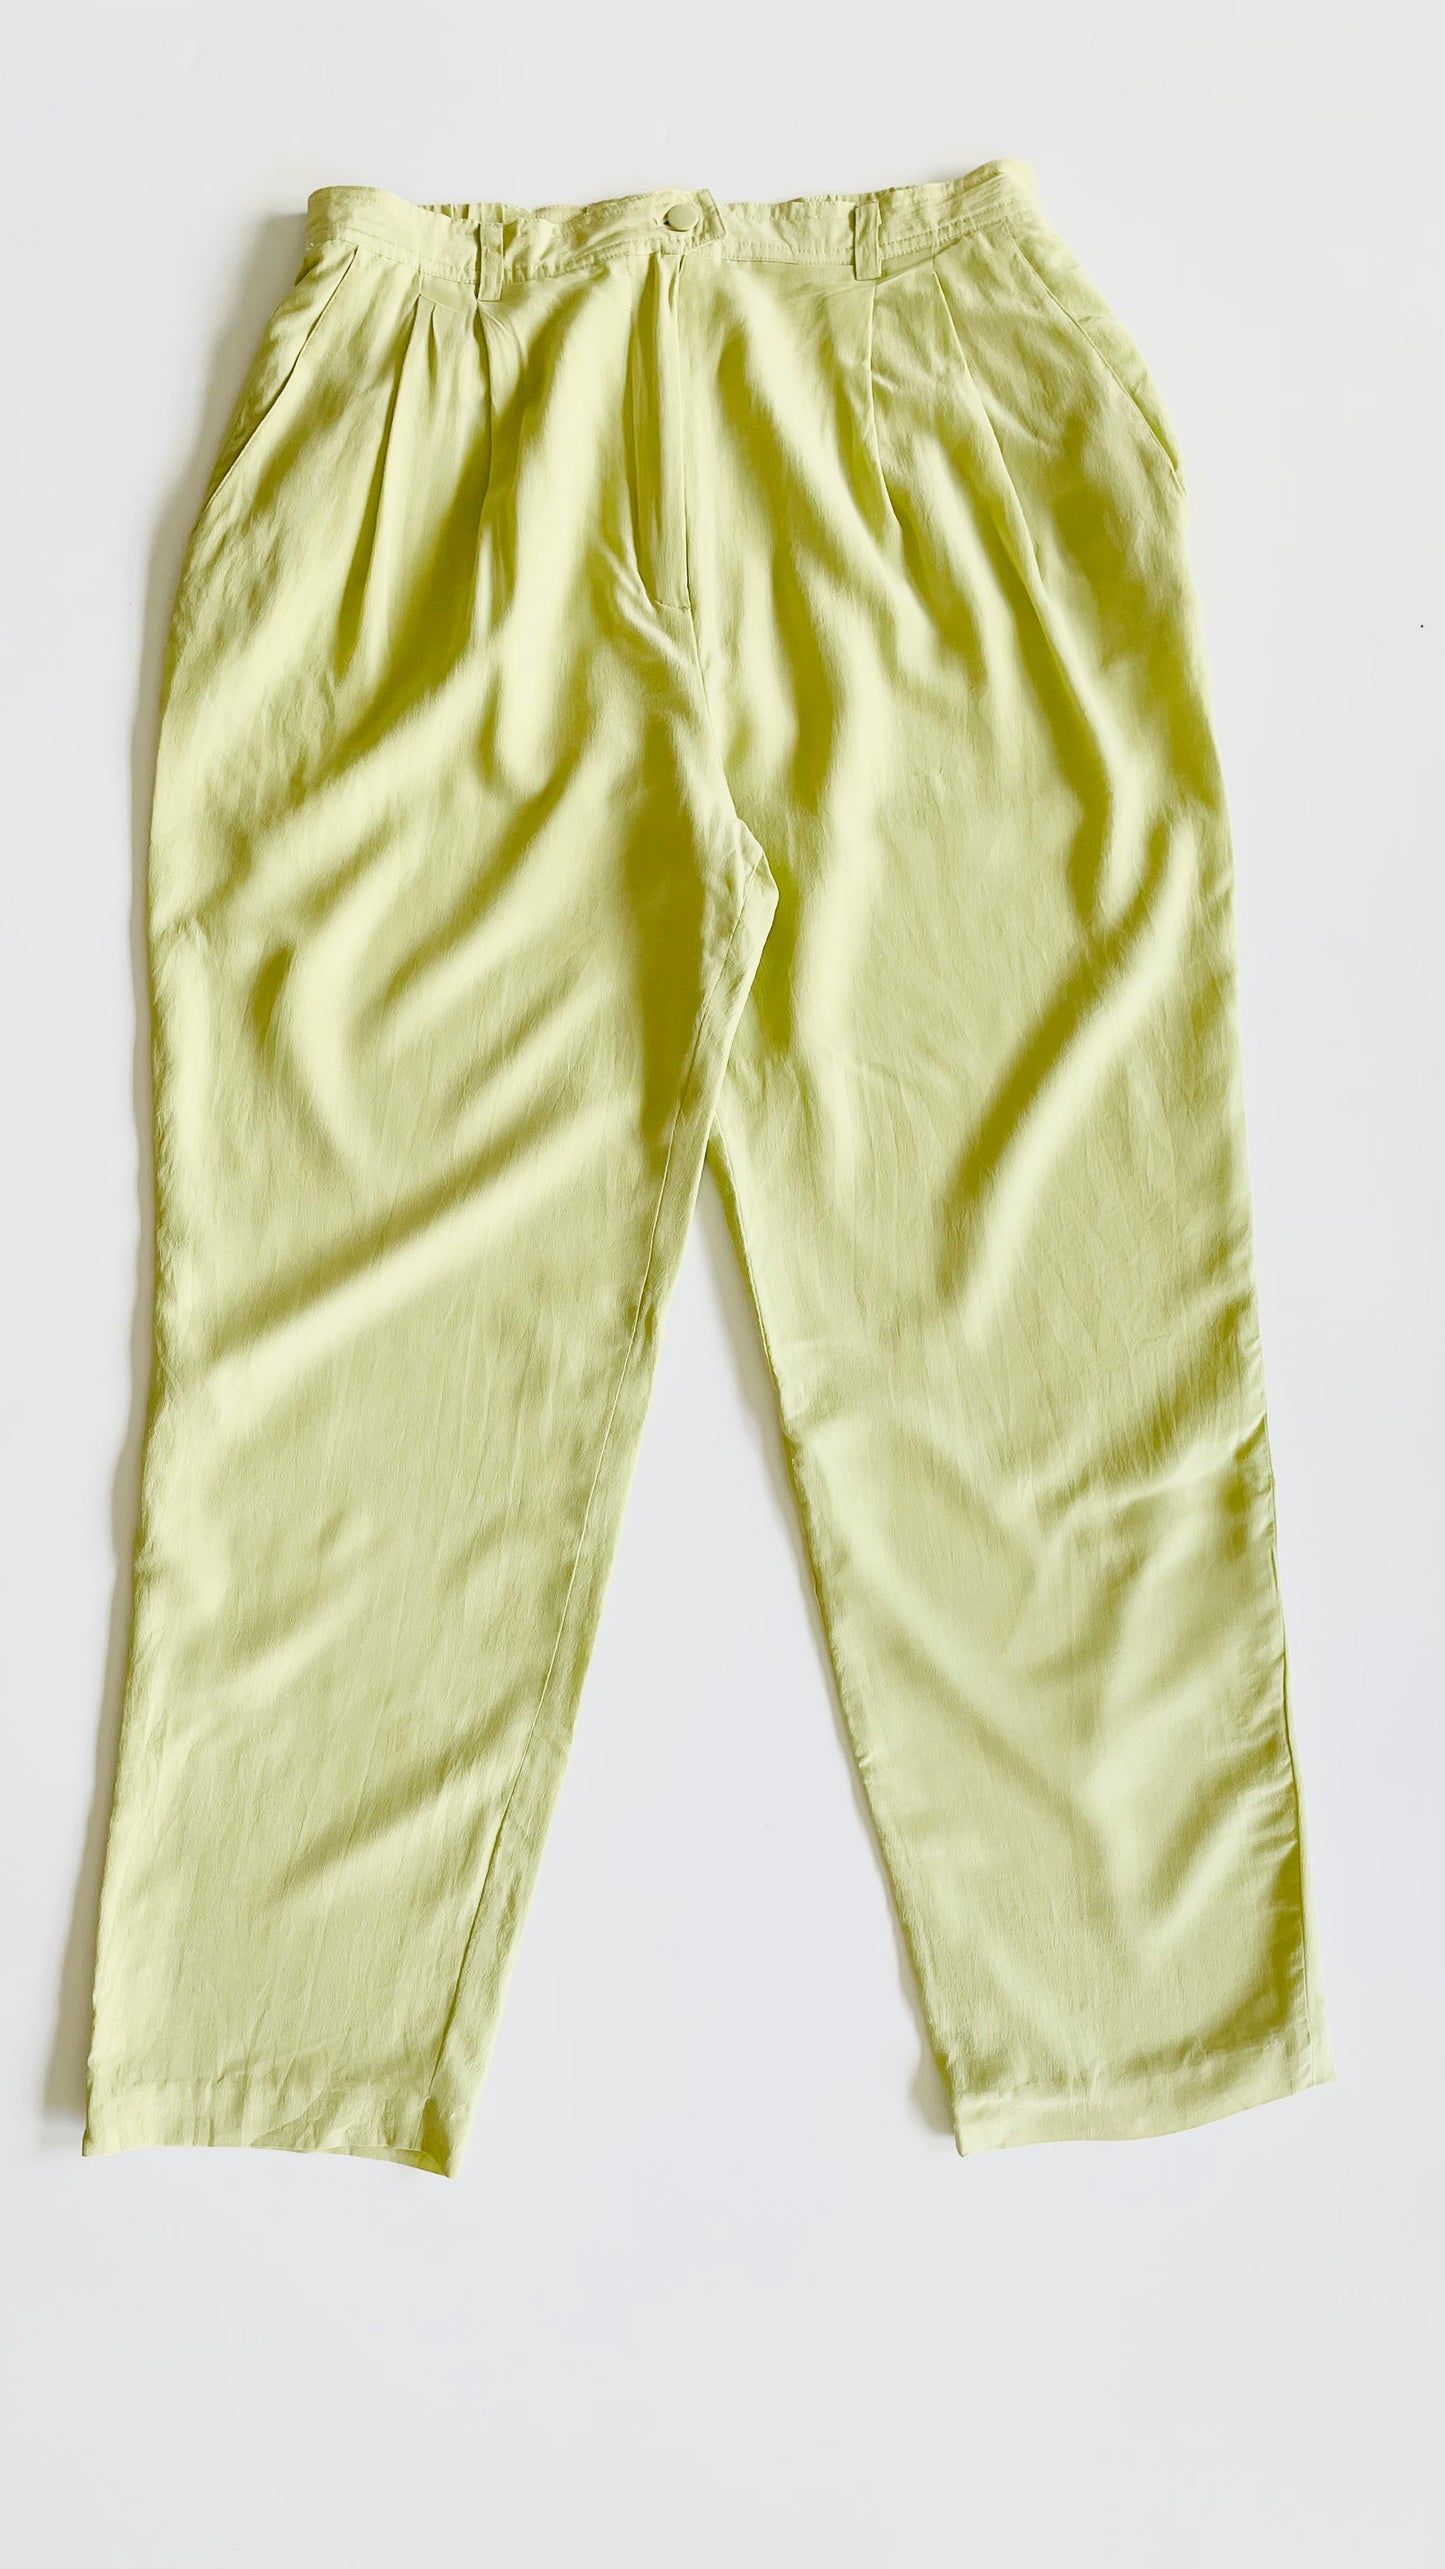 Vintage 90s lime green trousers - Size M